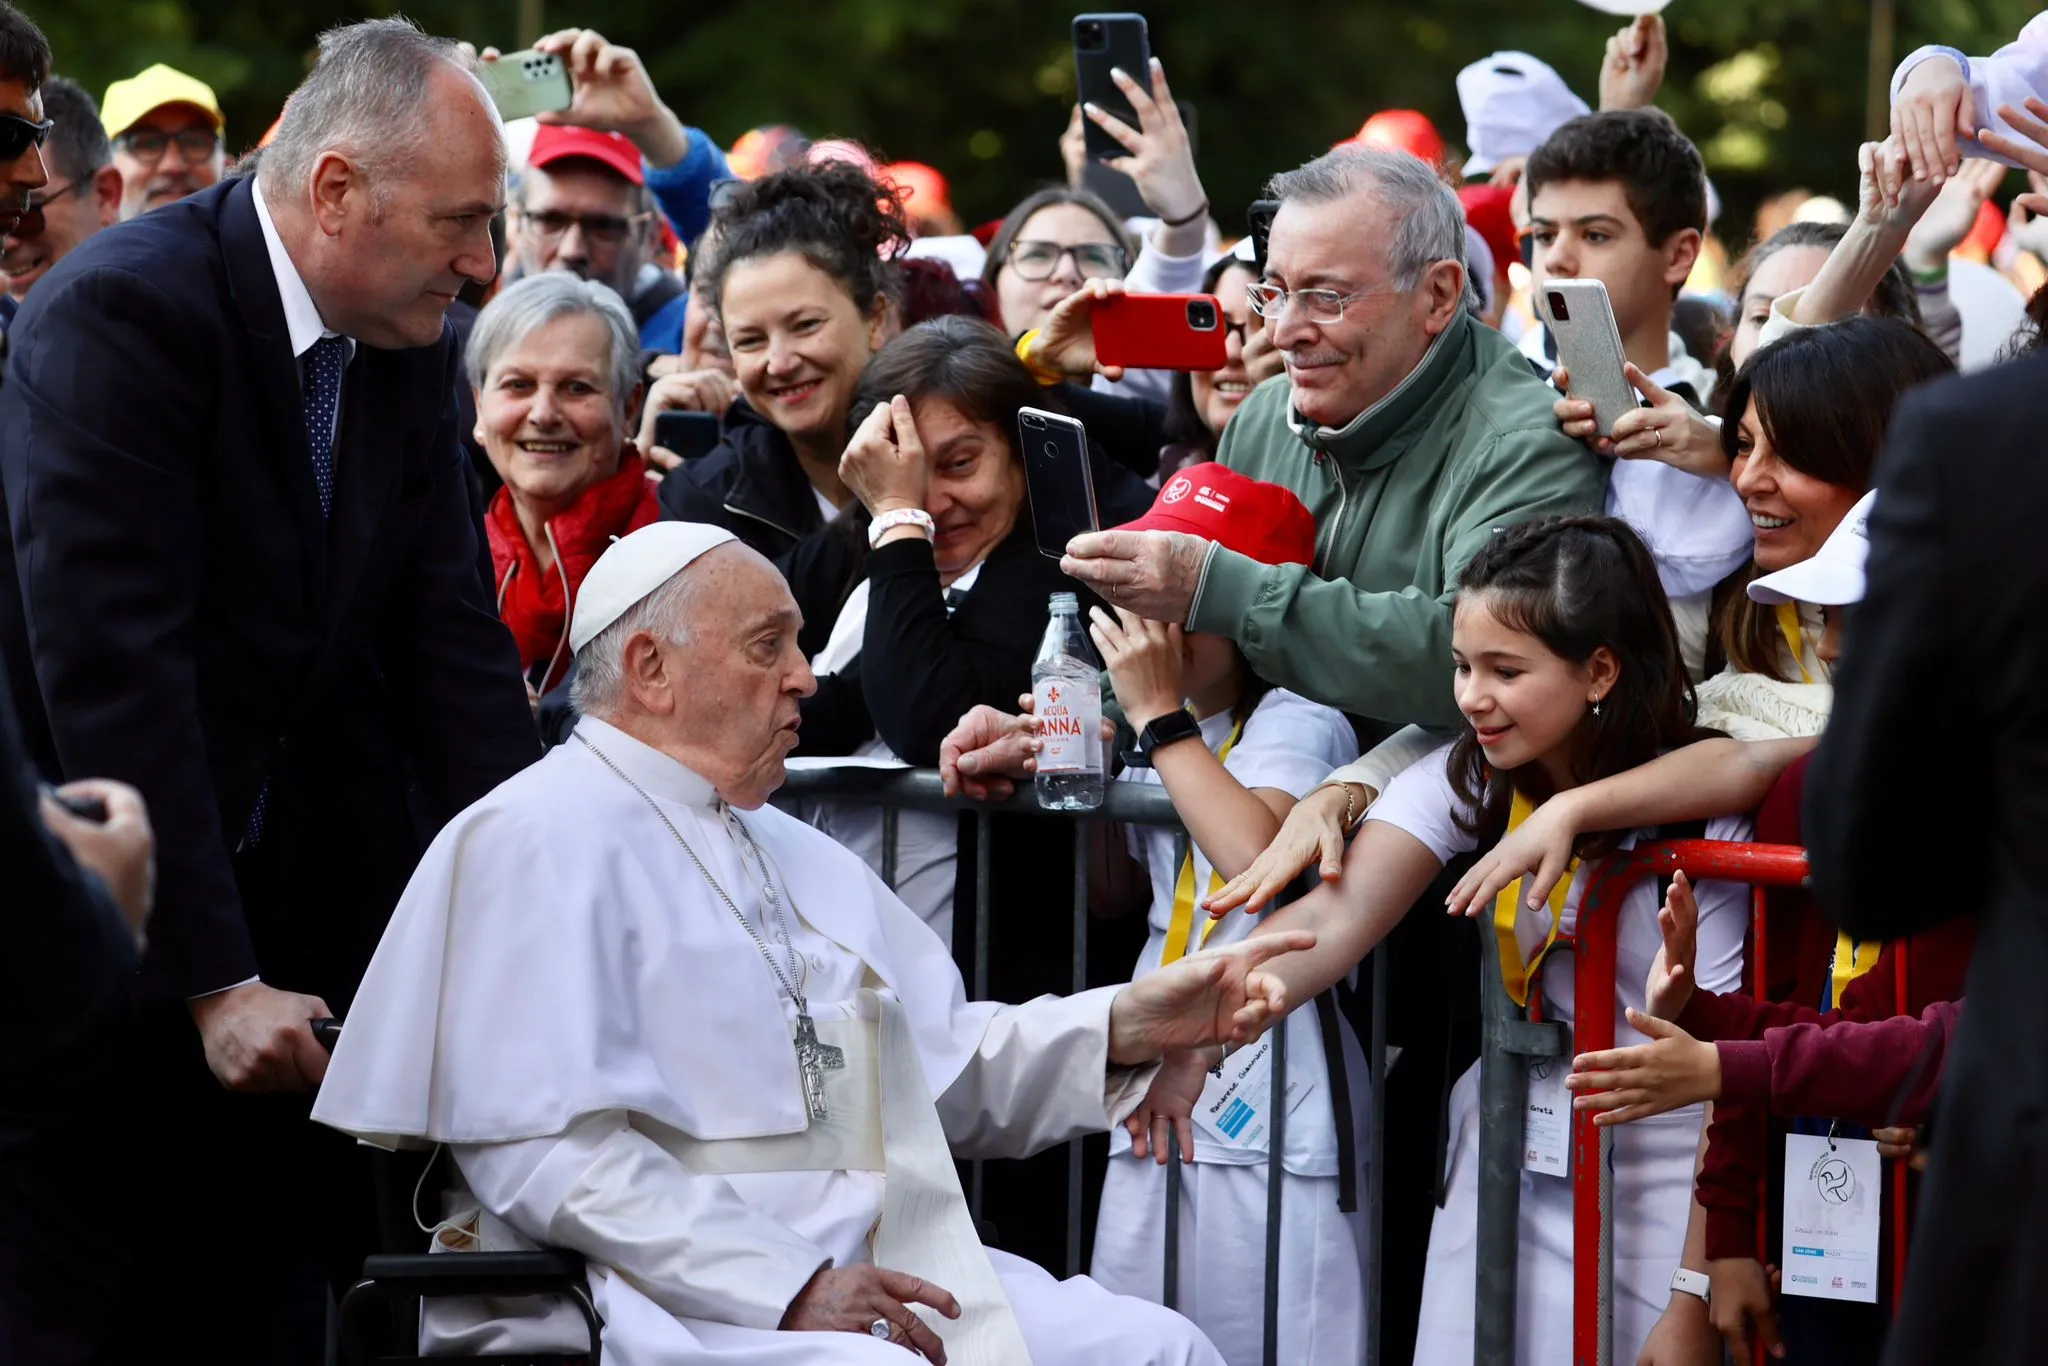 Pope Francis greets pilgrims as he arrives in Verona, Italy, for a pastoral visit on May 18, 2024. Credit: Daniel Ibañez/CNA